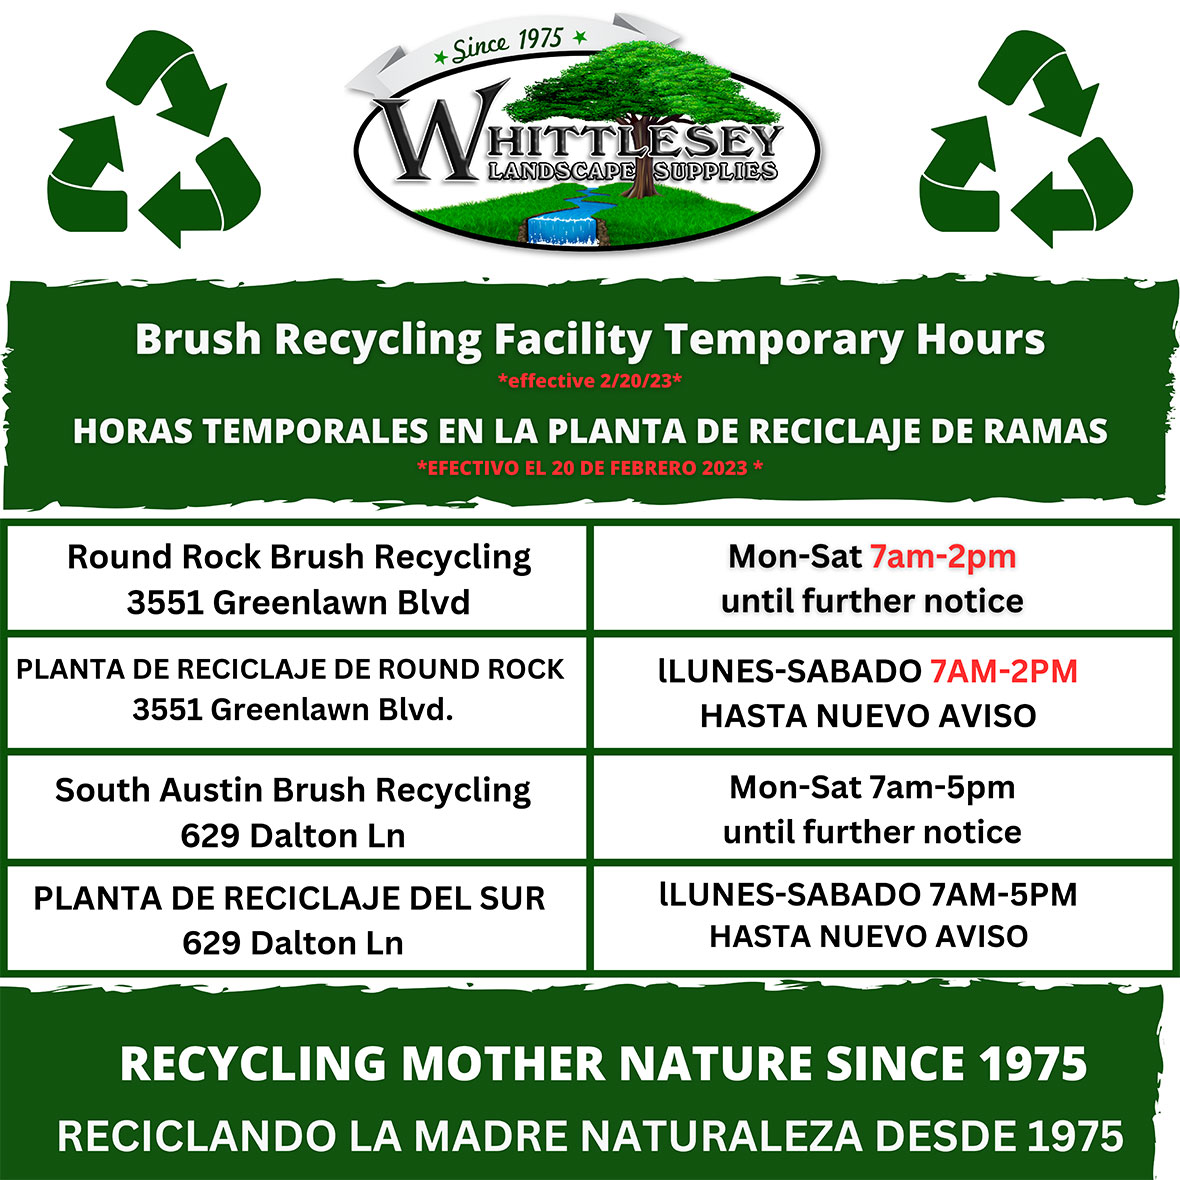 Brush Recycling Facility temporary hours.